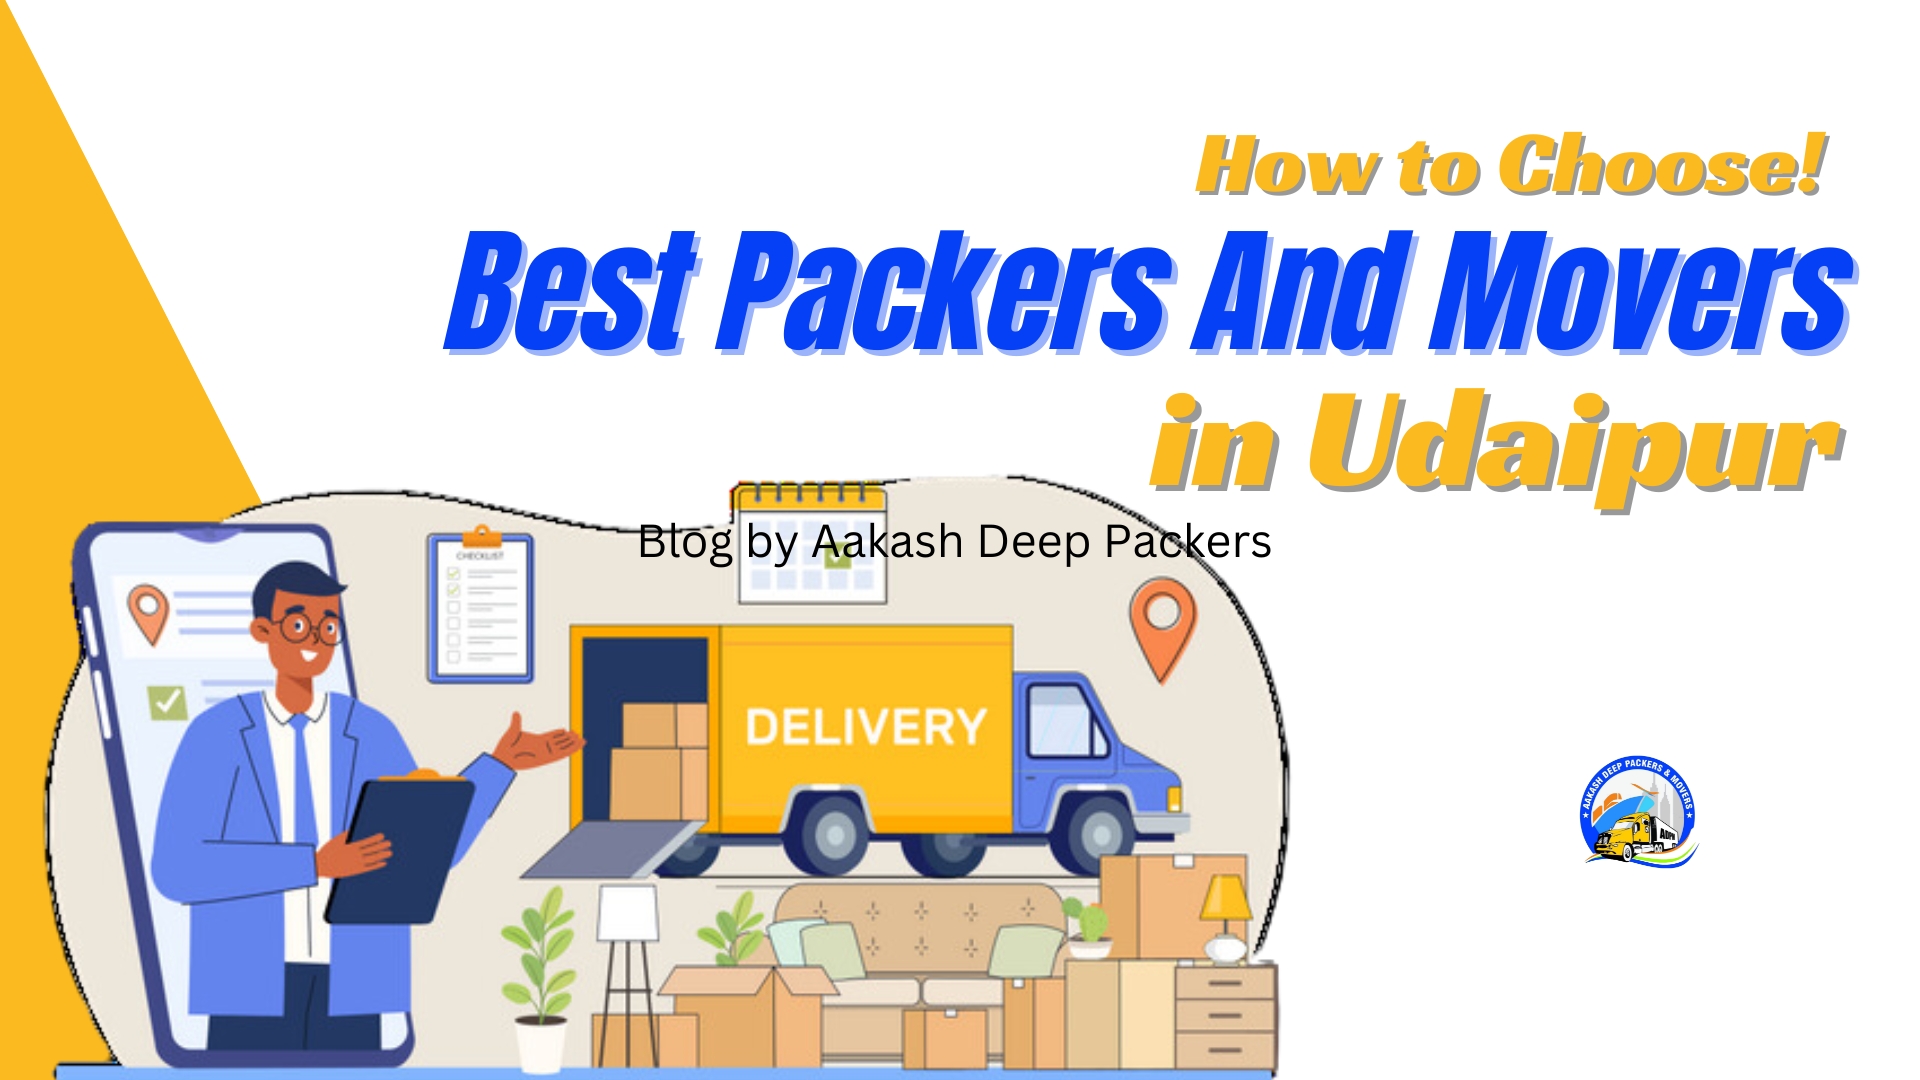 How to Choose Best Packers And Movers in Udaipur